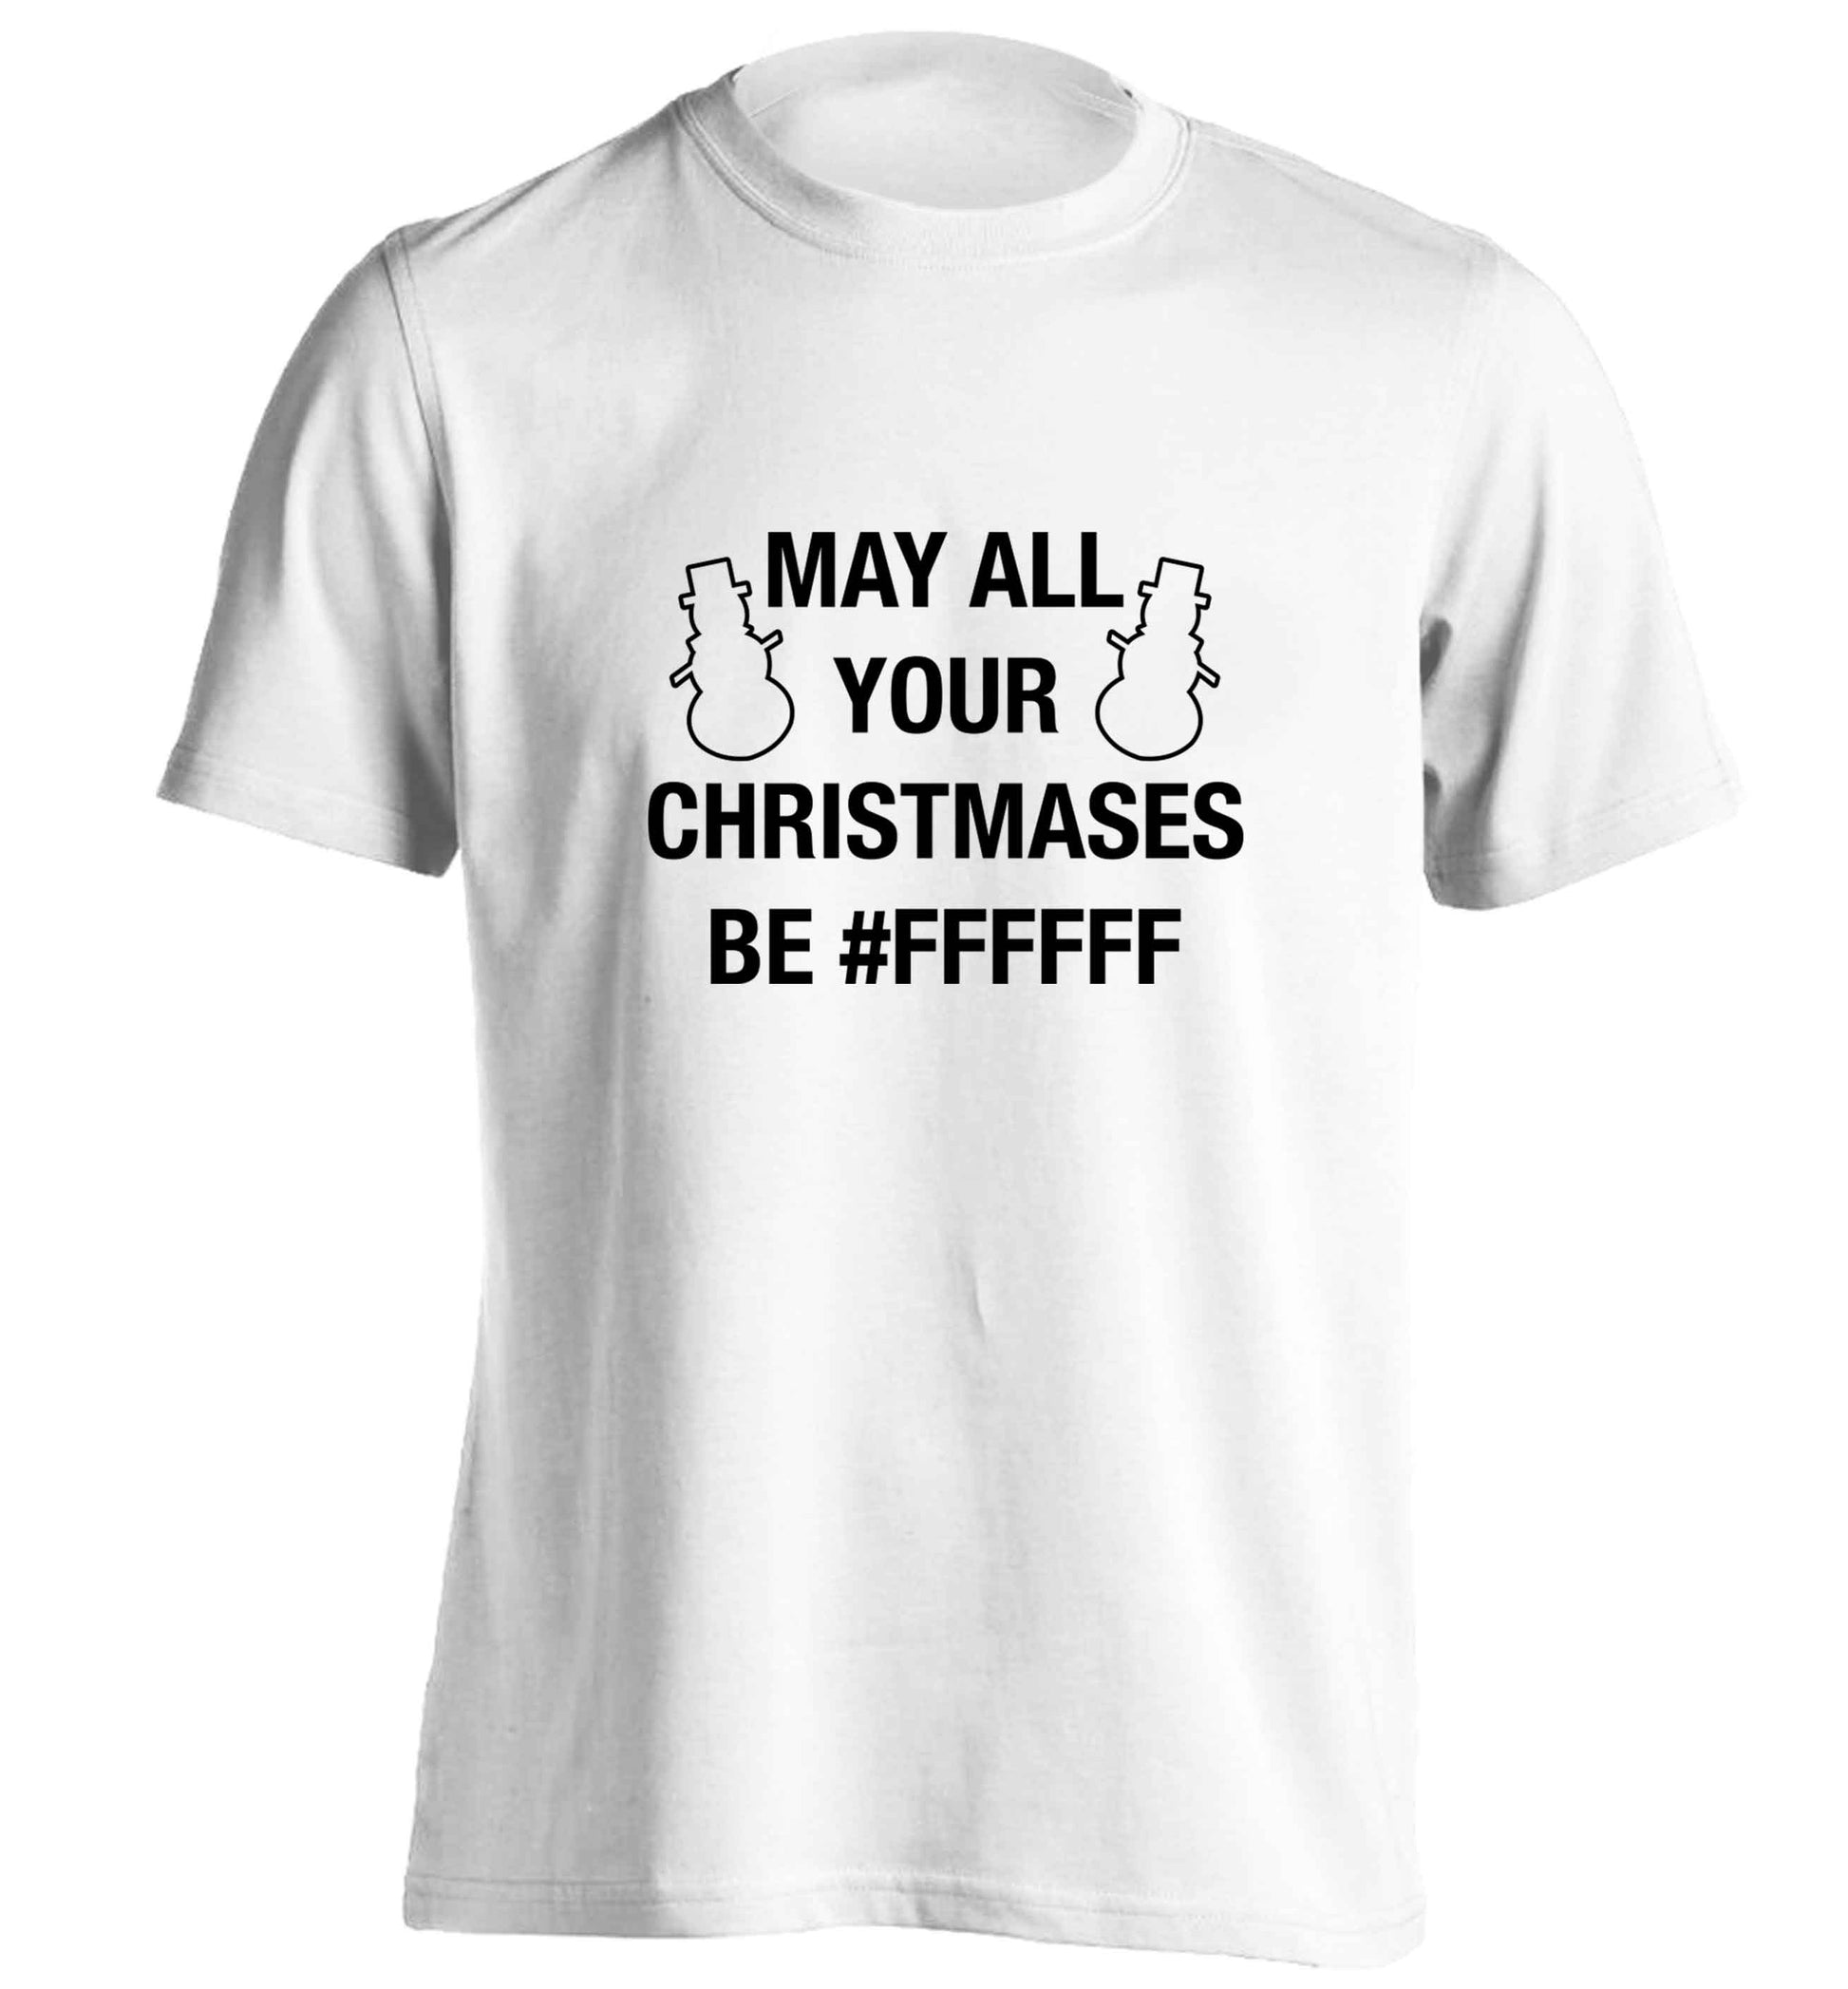 May all your Christmases be #FFFFFF adults unisex white Tshirt 2XL